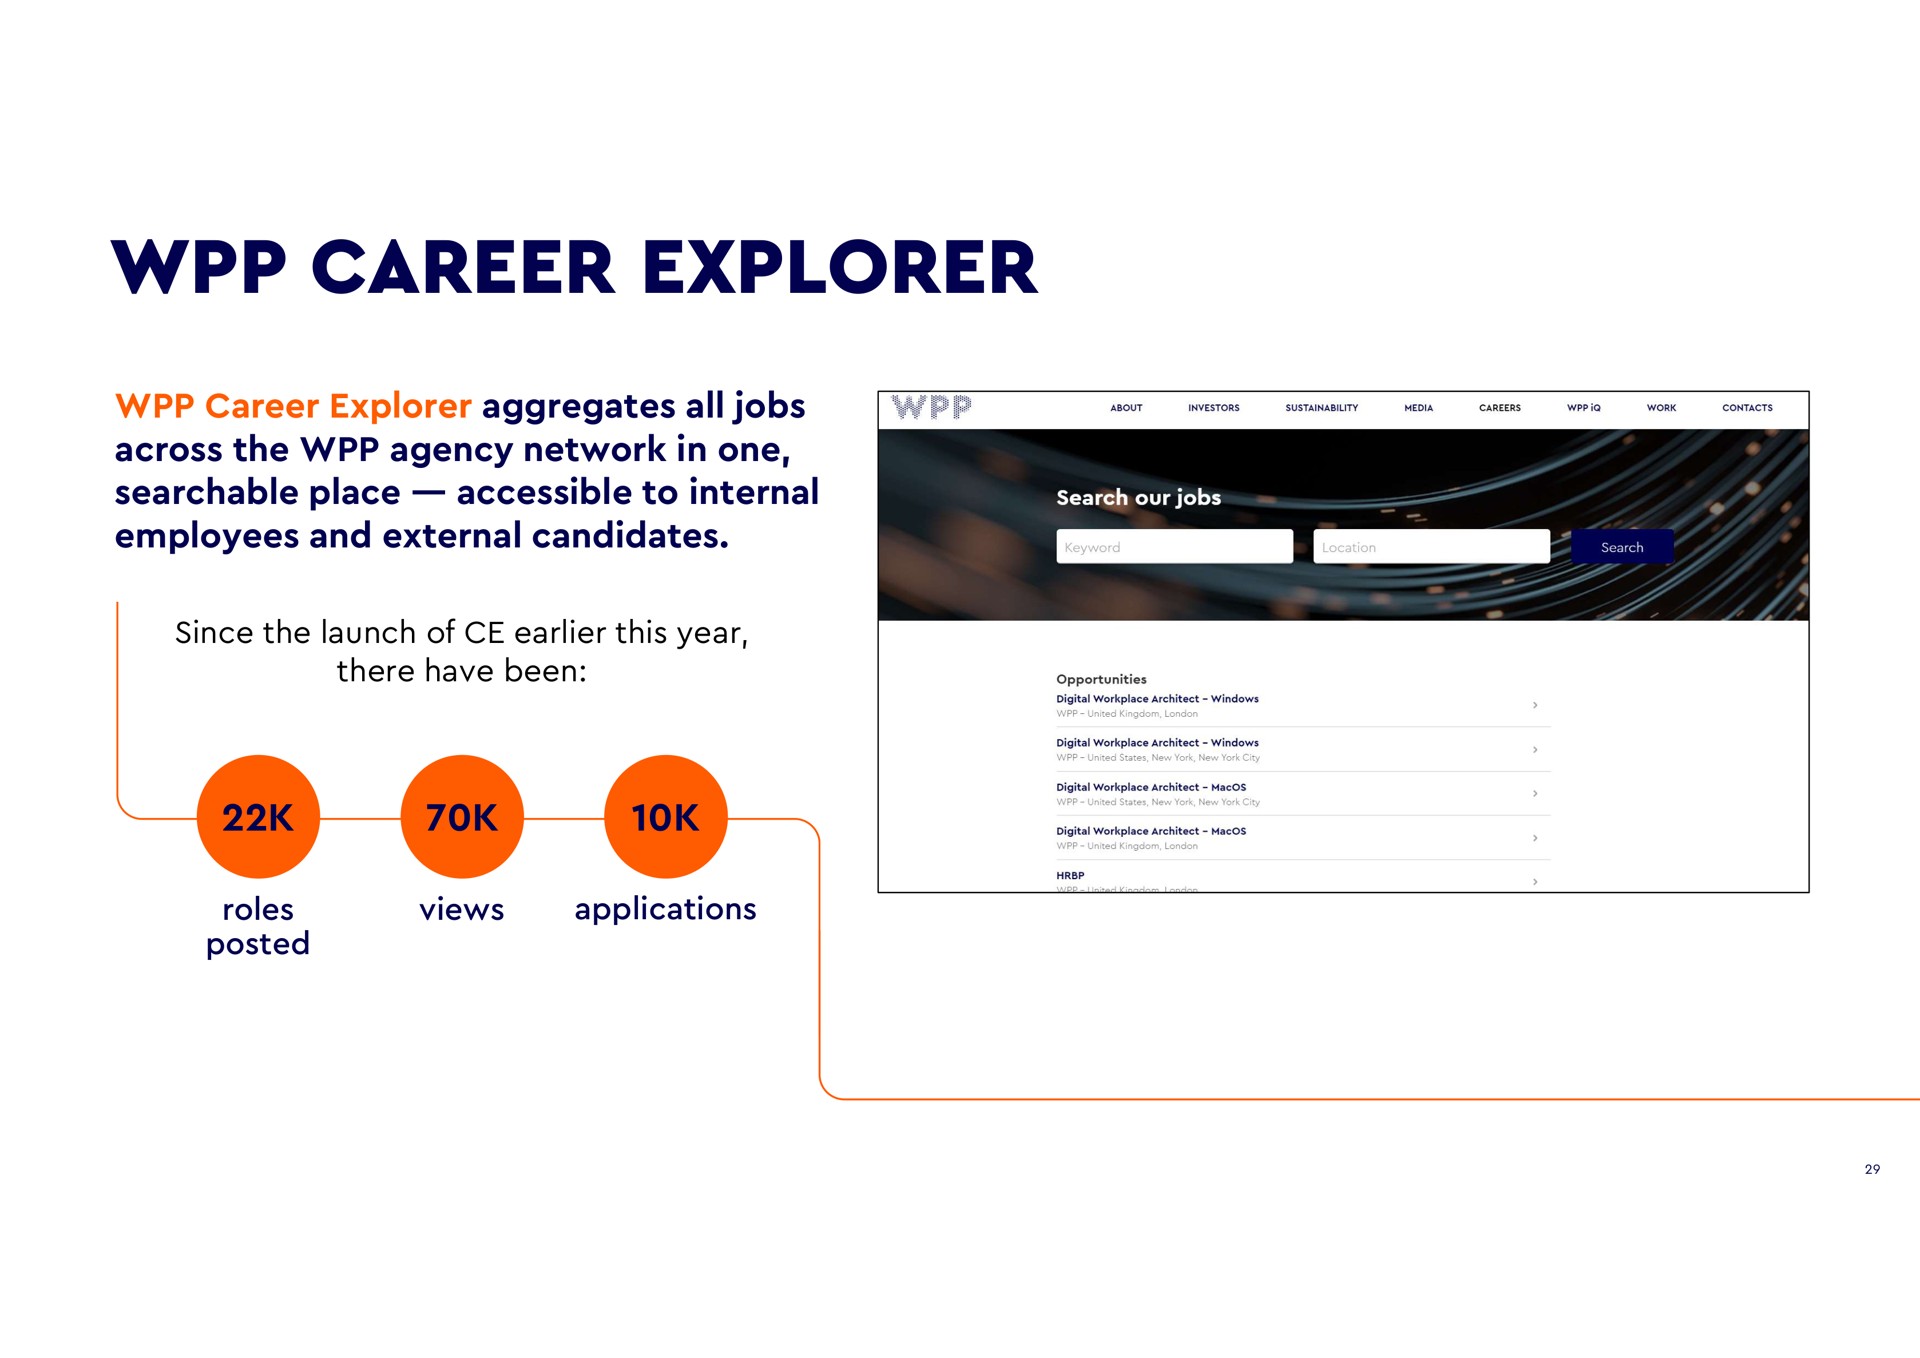 career explorer aggregates all jobs across the agency network in one searchable place accessible to internal employees and external candidates since the launch of this year there have been about investors media careers work contacts search our jobs opportunities digital workplace architect windows digital workplace architect windows cit new united states york new york roles posted views applications digital workplace architect digital workplace architect | WPP